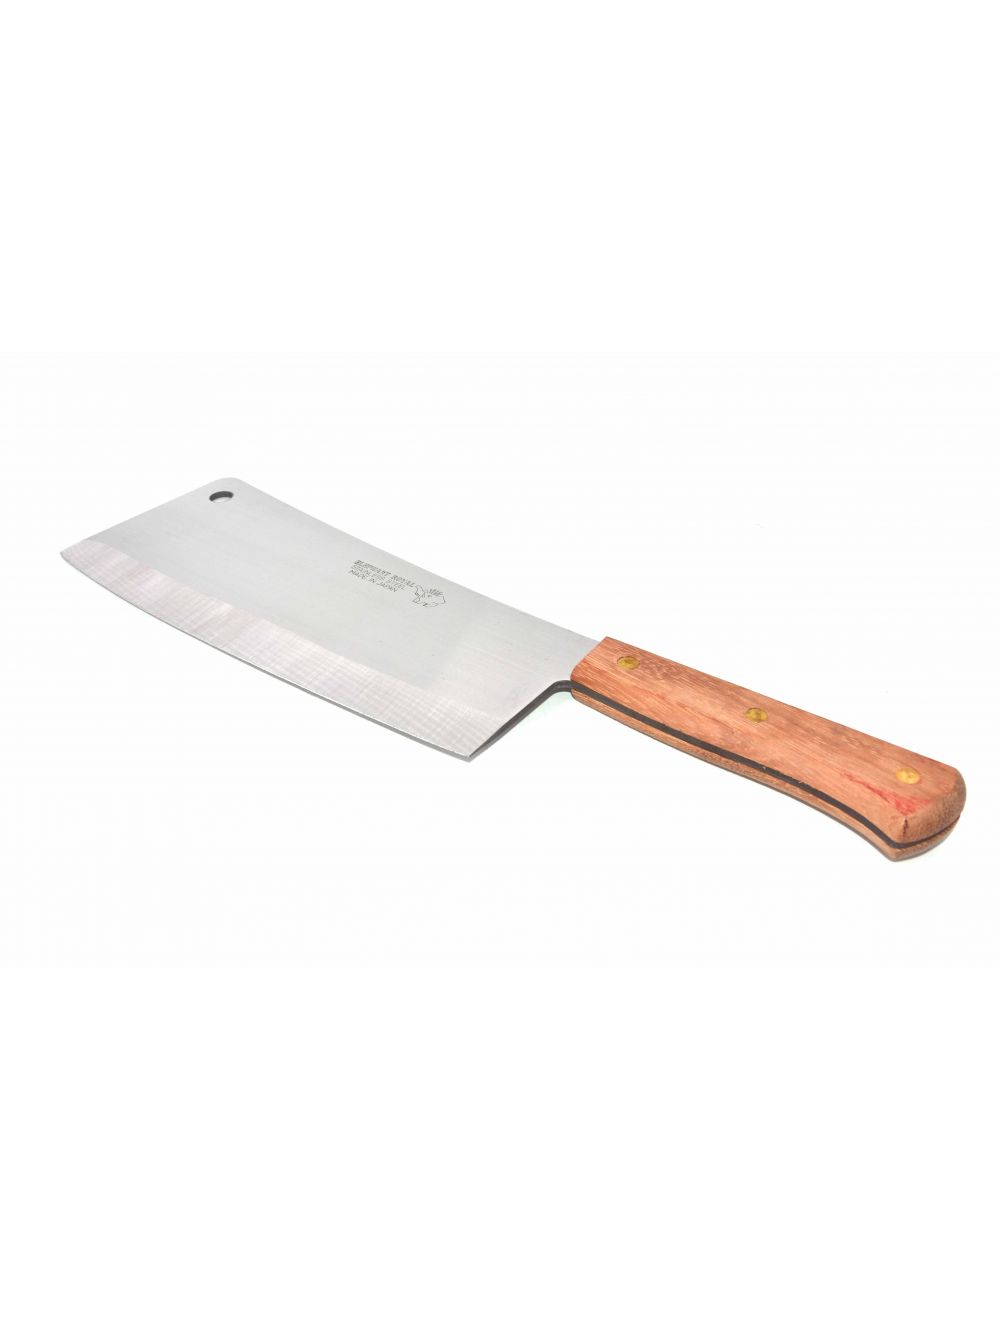 Cleaver Knife With Wooden Handle 10 Inch